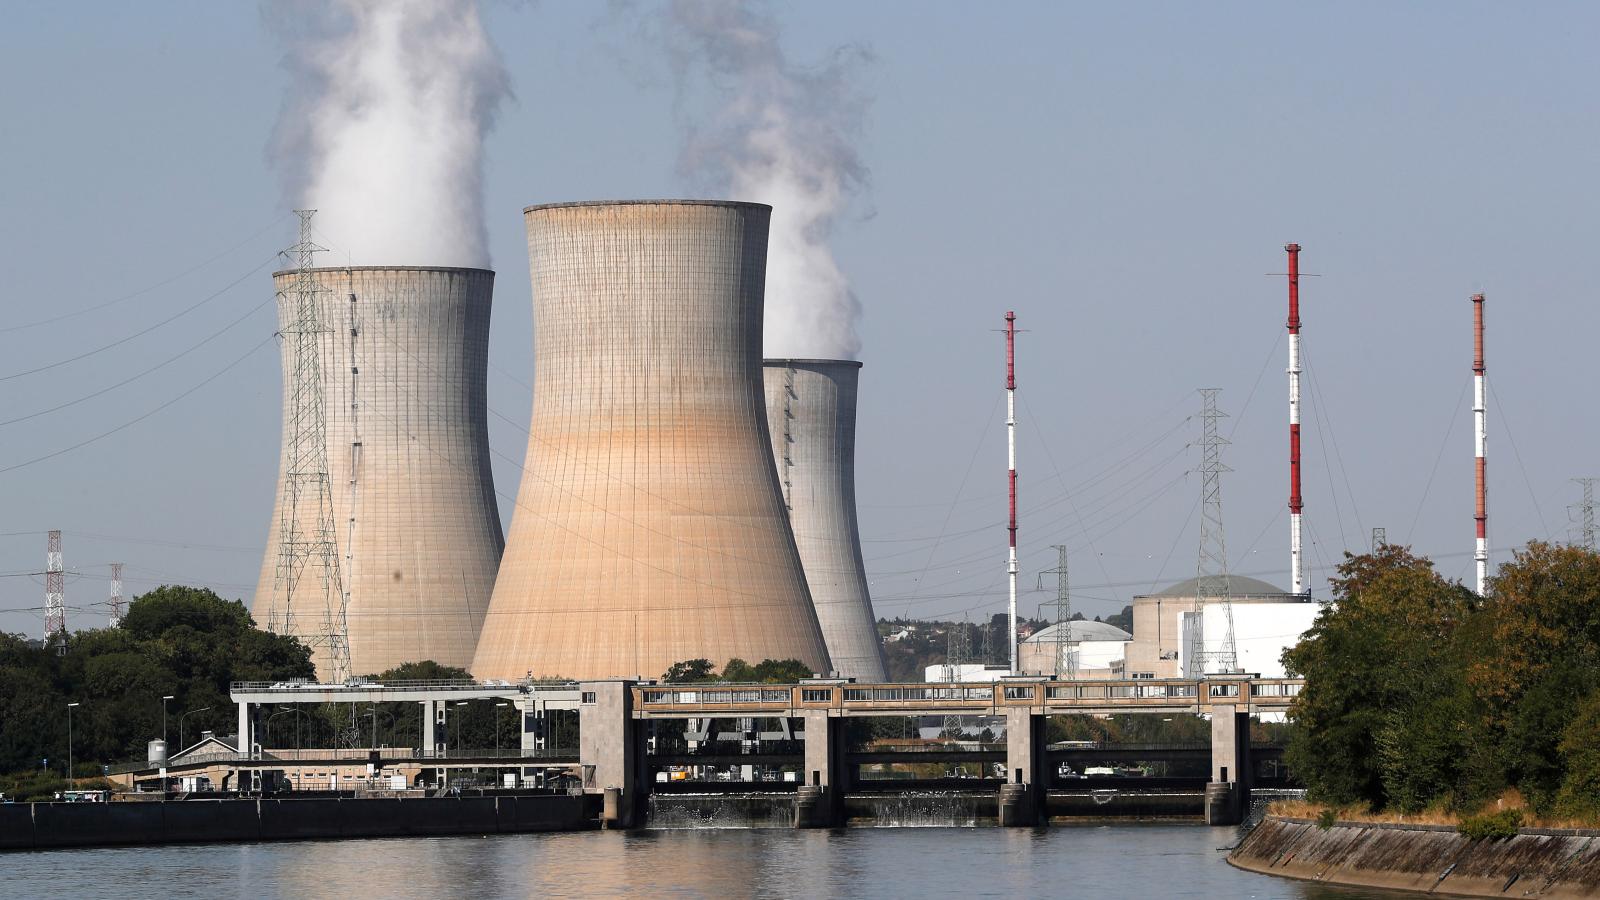 The hidden water footprint of fossil fuel and nuclear power plants